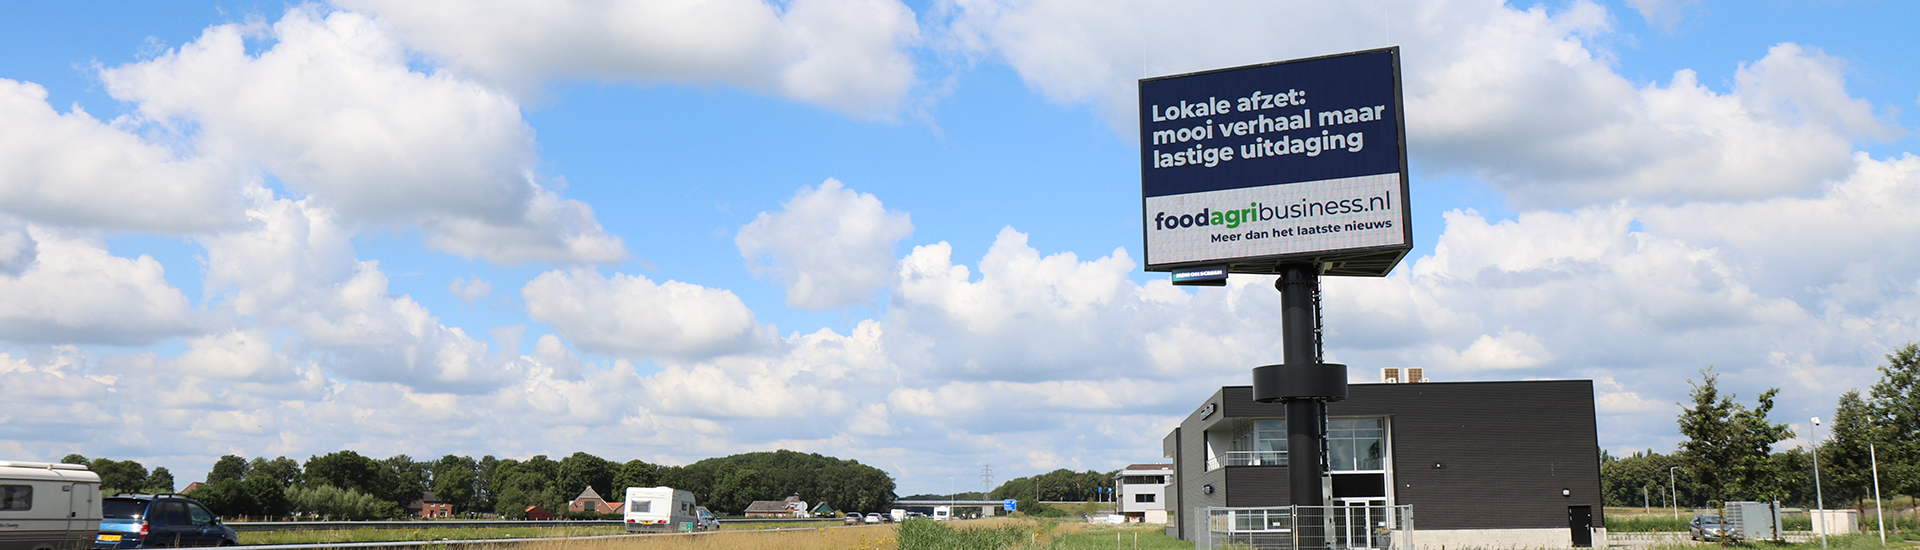 Campagne Food&Agribusiness reclamemast A18